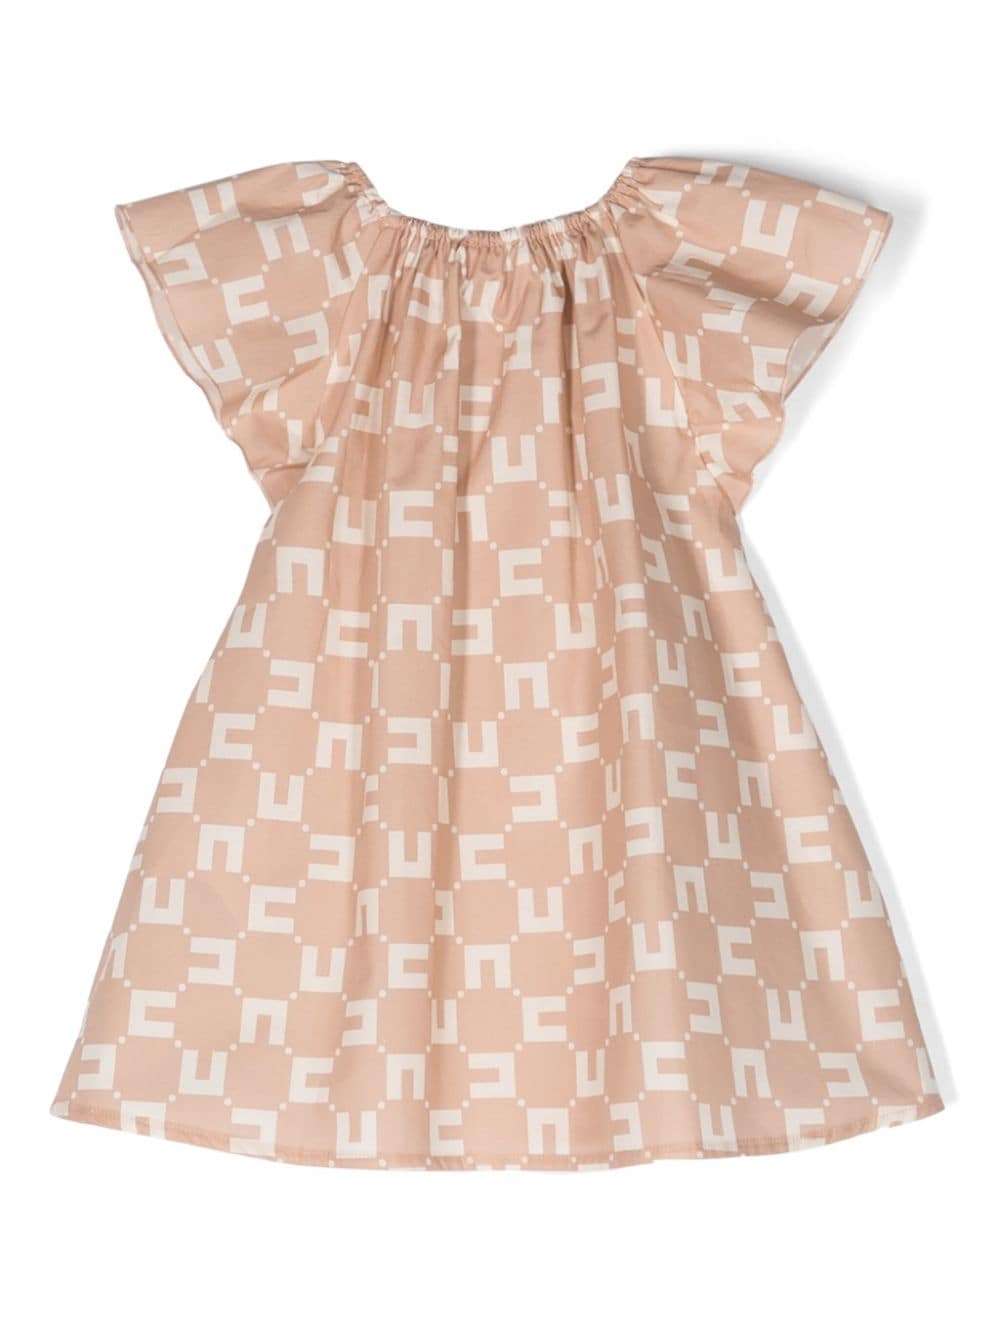 Beige dress for baby girls with all-over logo